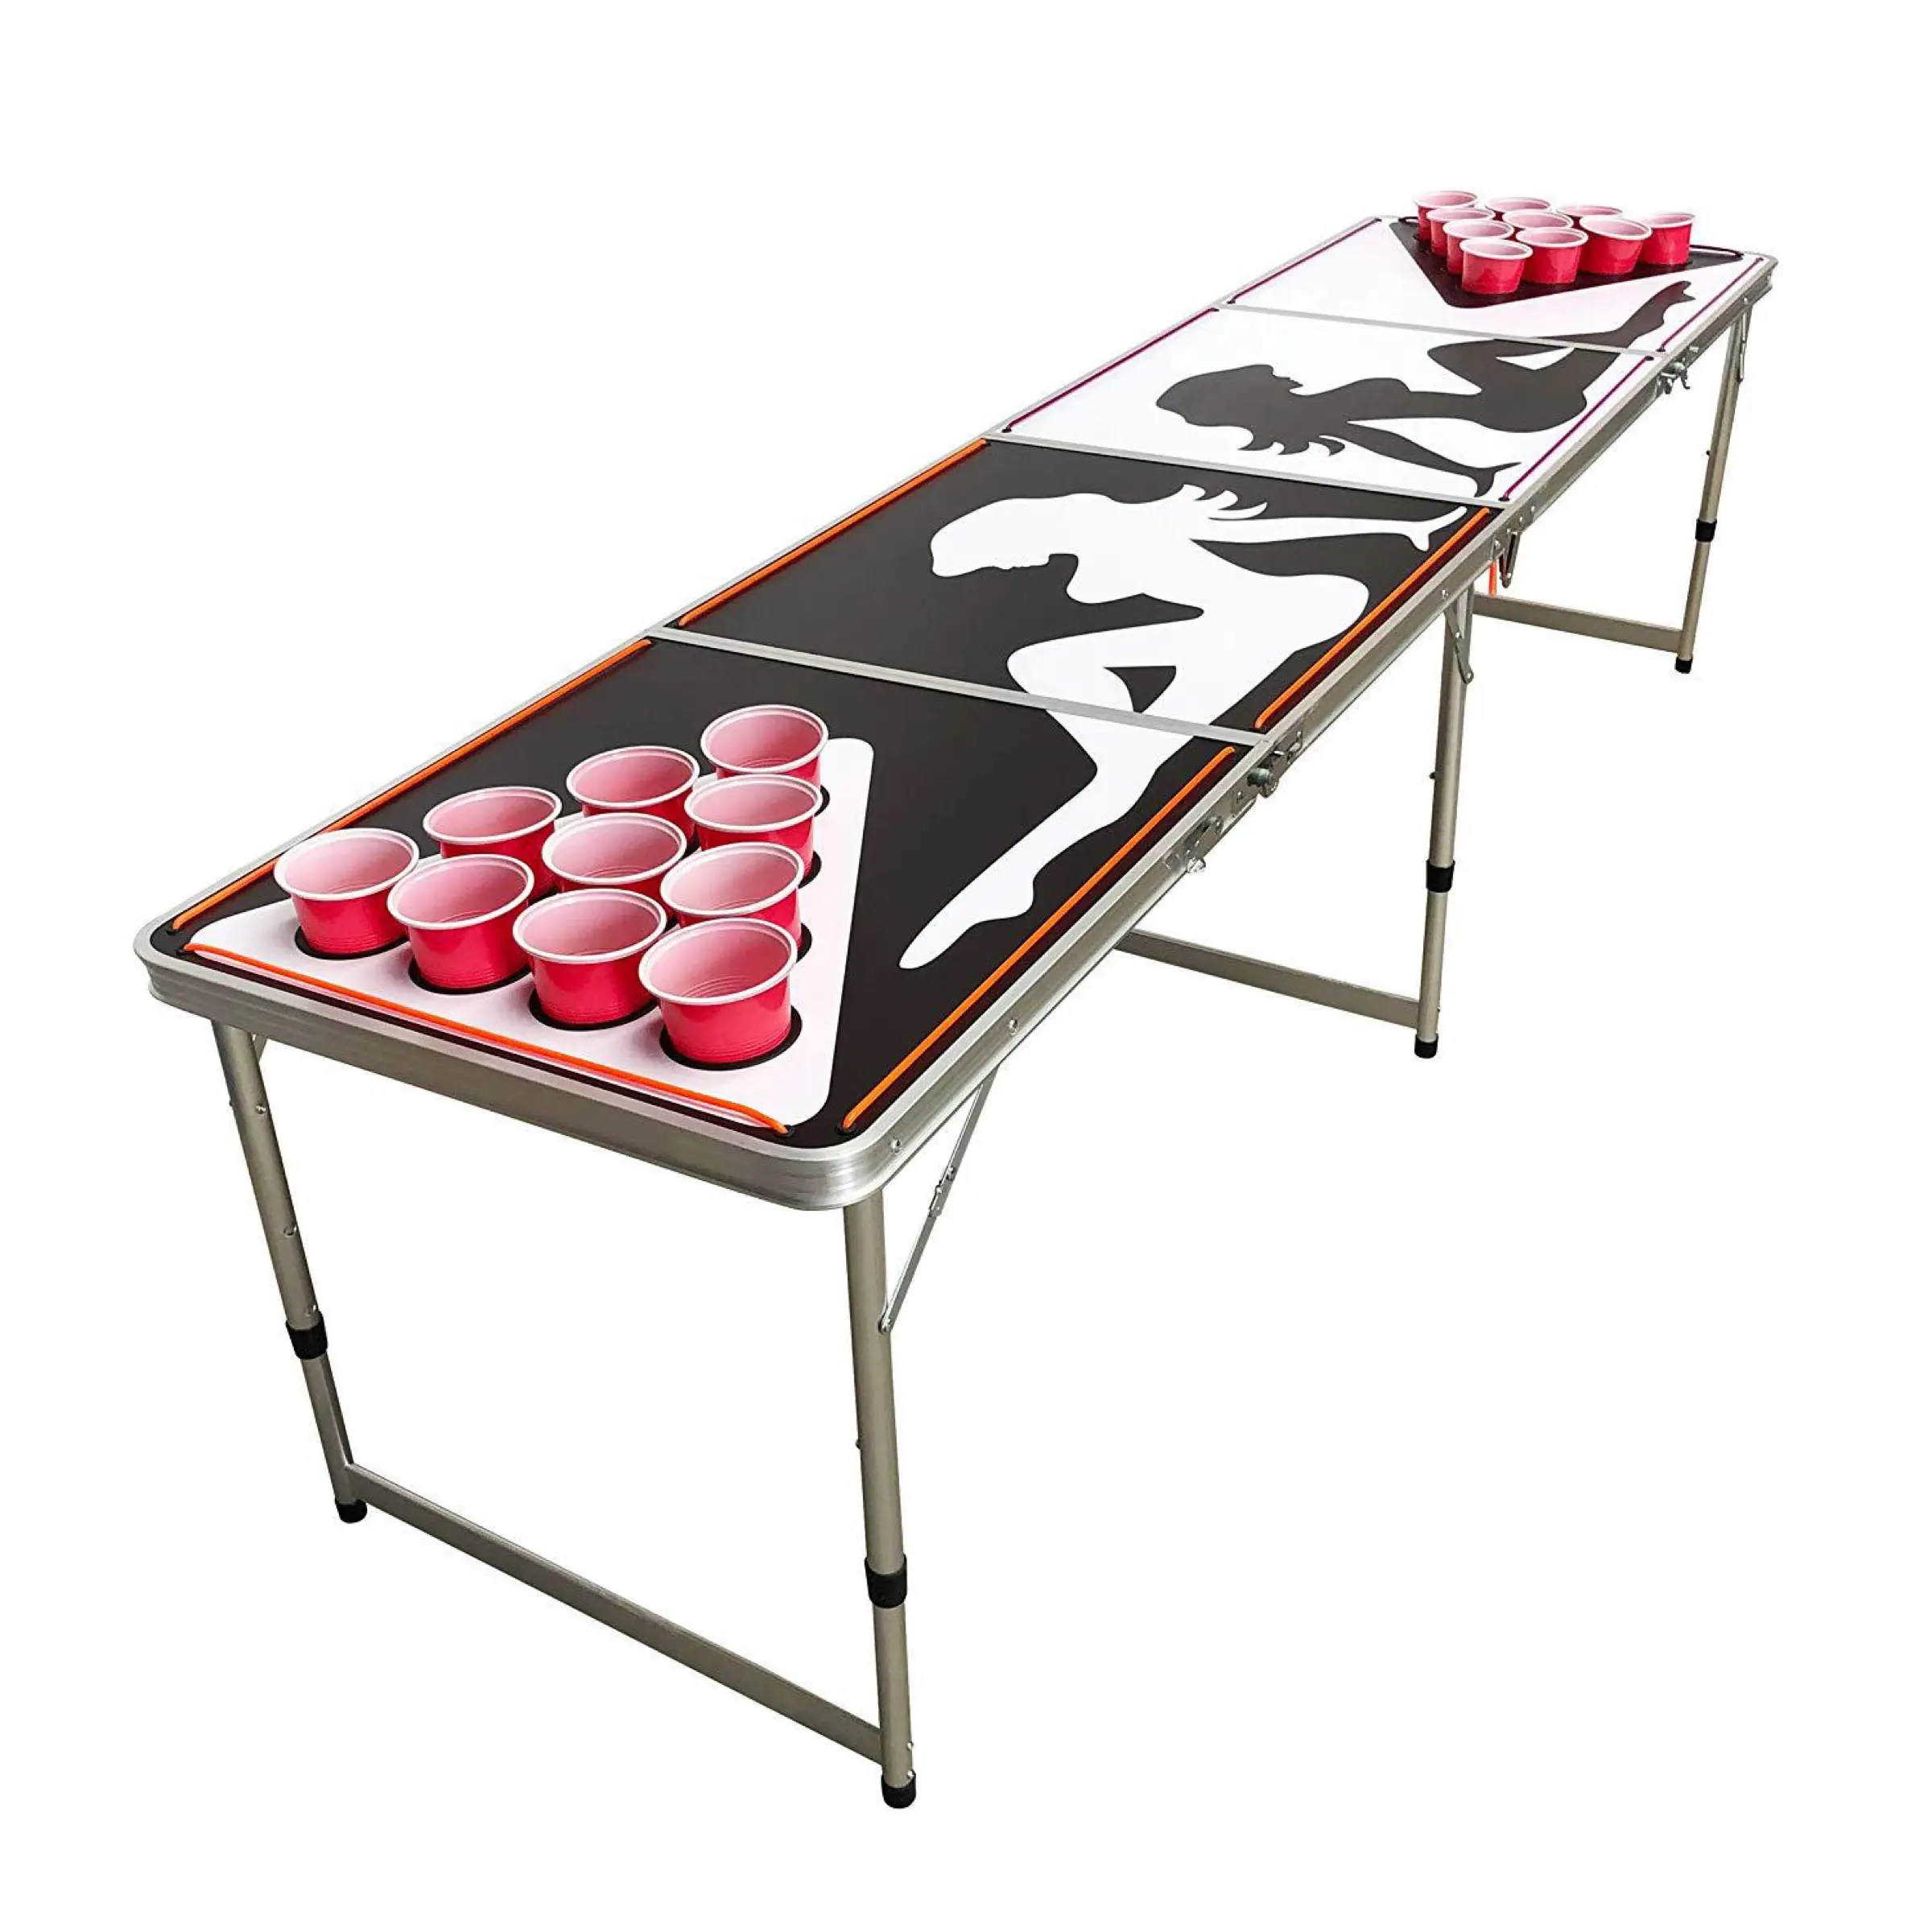 8ft table beer pong for party event, 240cm long picnic table foldable lightweight, 2.4m lightweight folding table portable